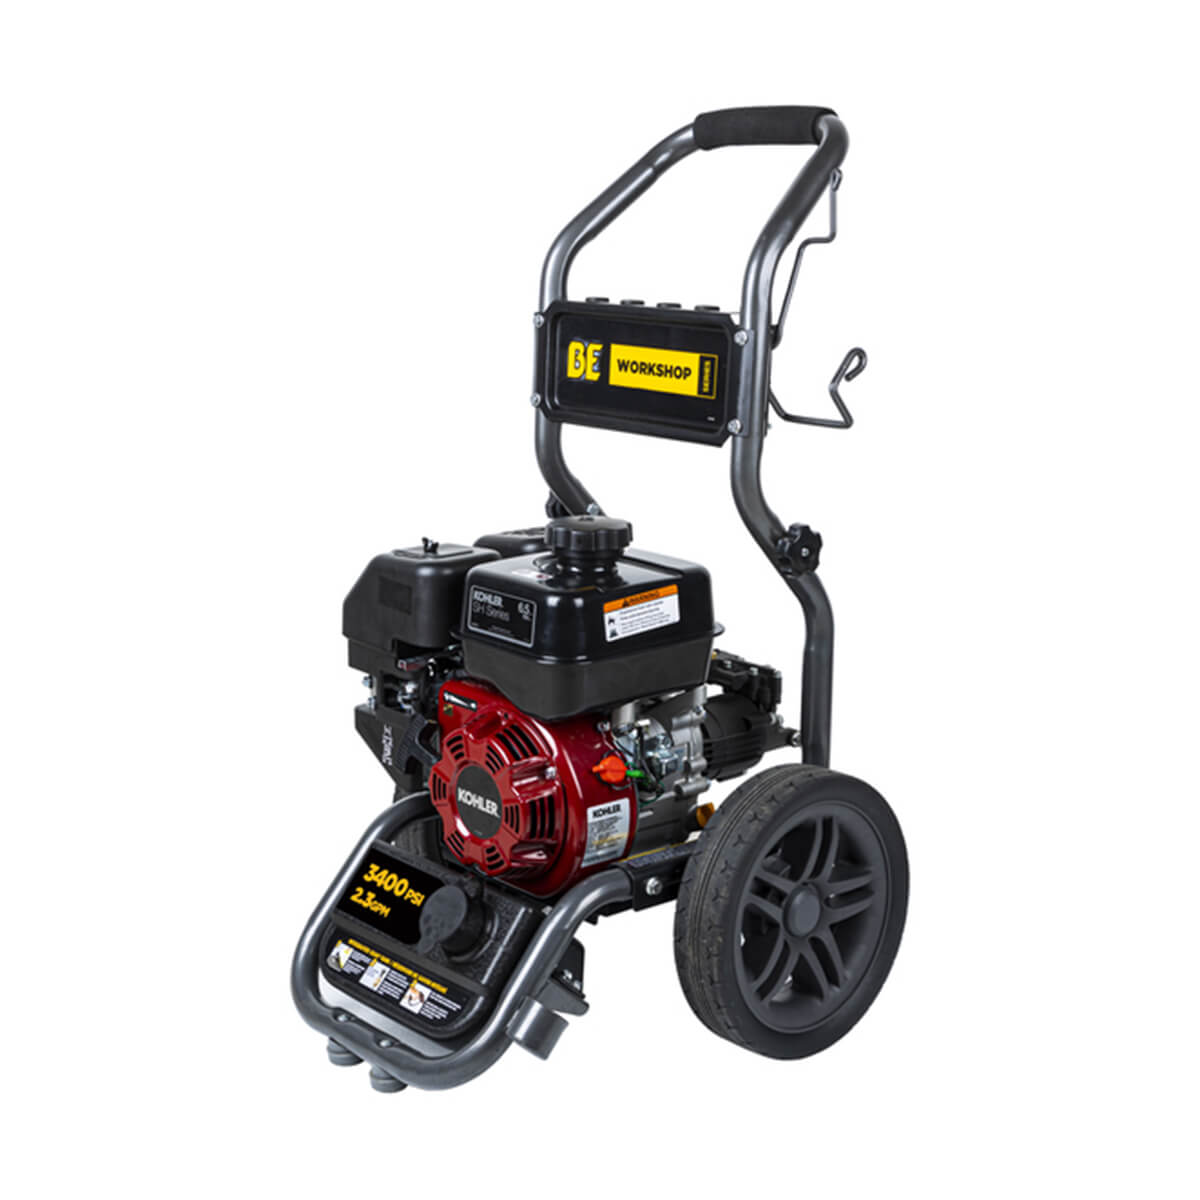 Gas Pressure Washer with Kohler SH270 Engine and Axial Pump - 3,400 PSI - 2.3 GPM